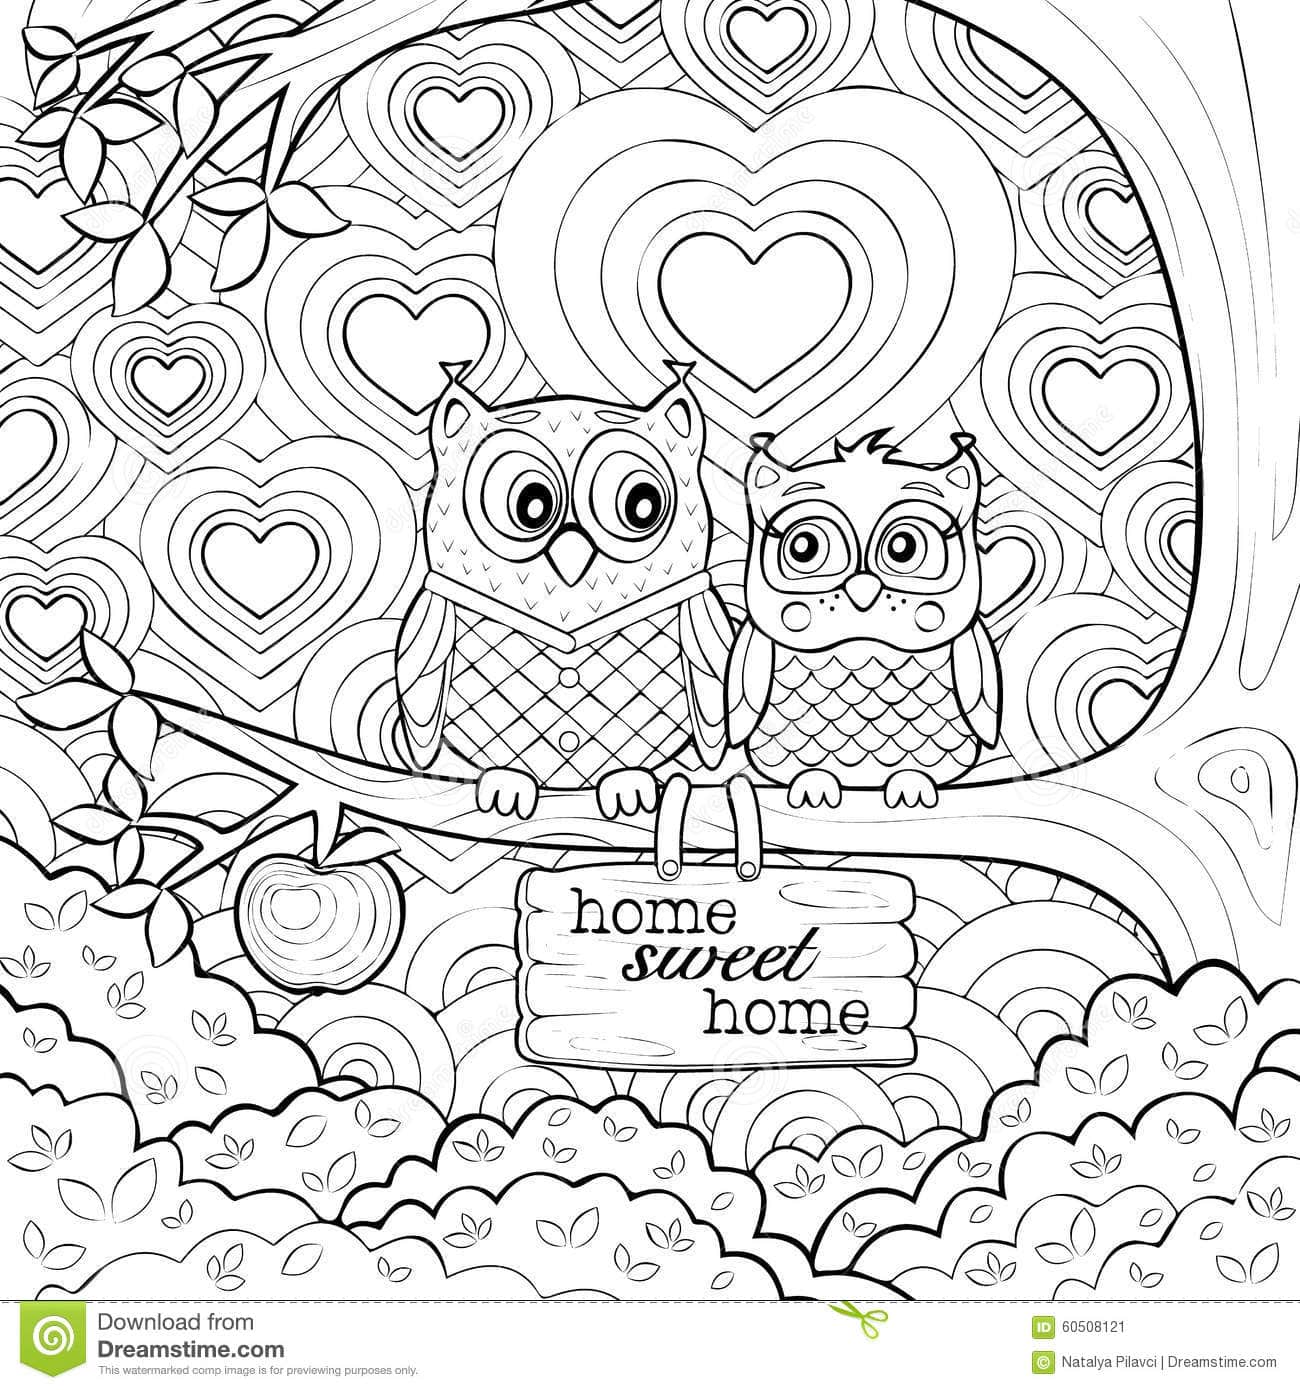 20 Therapeutic Coloring Pages for Kids   Happier Human